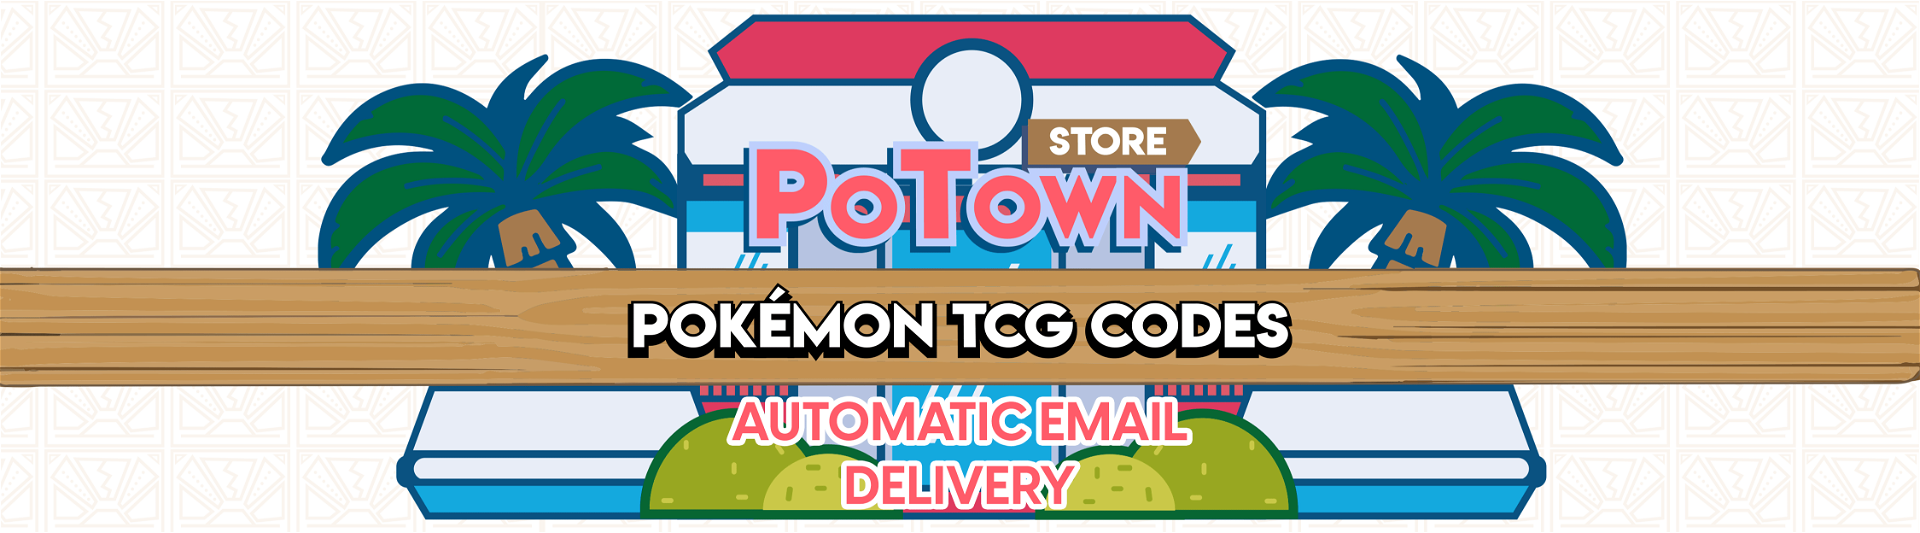 Rebel Clash Elite Trainer Box PTCGO Code Same Day Email Delivery 